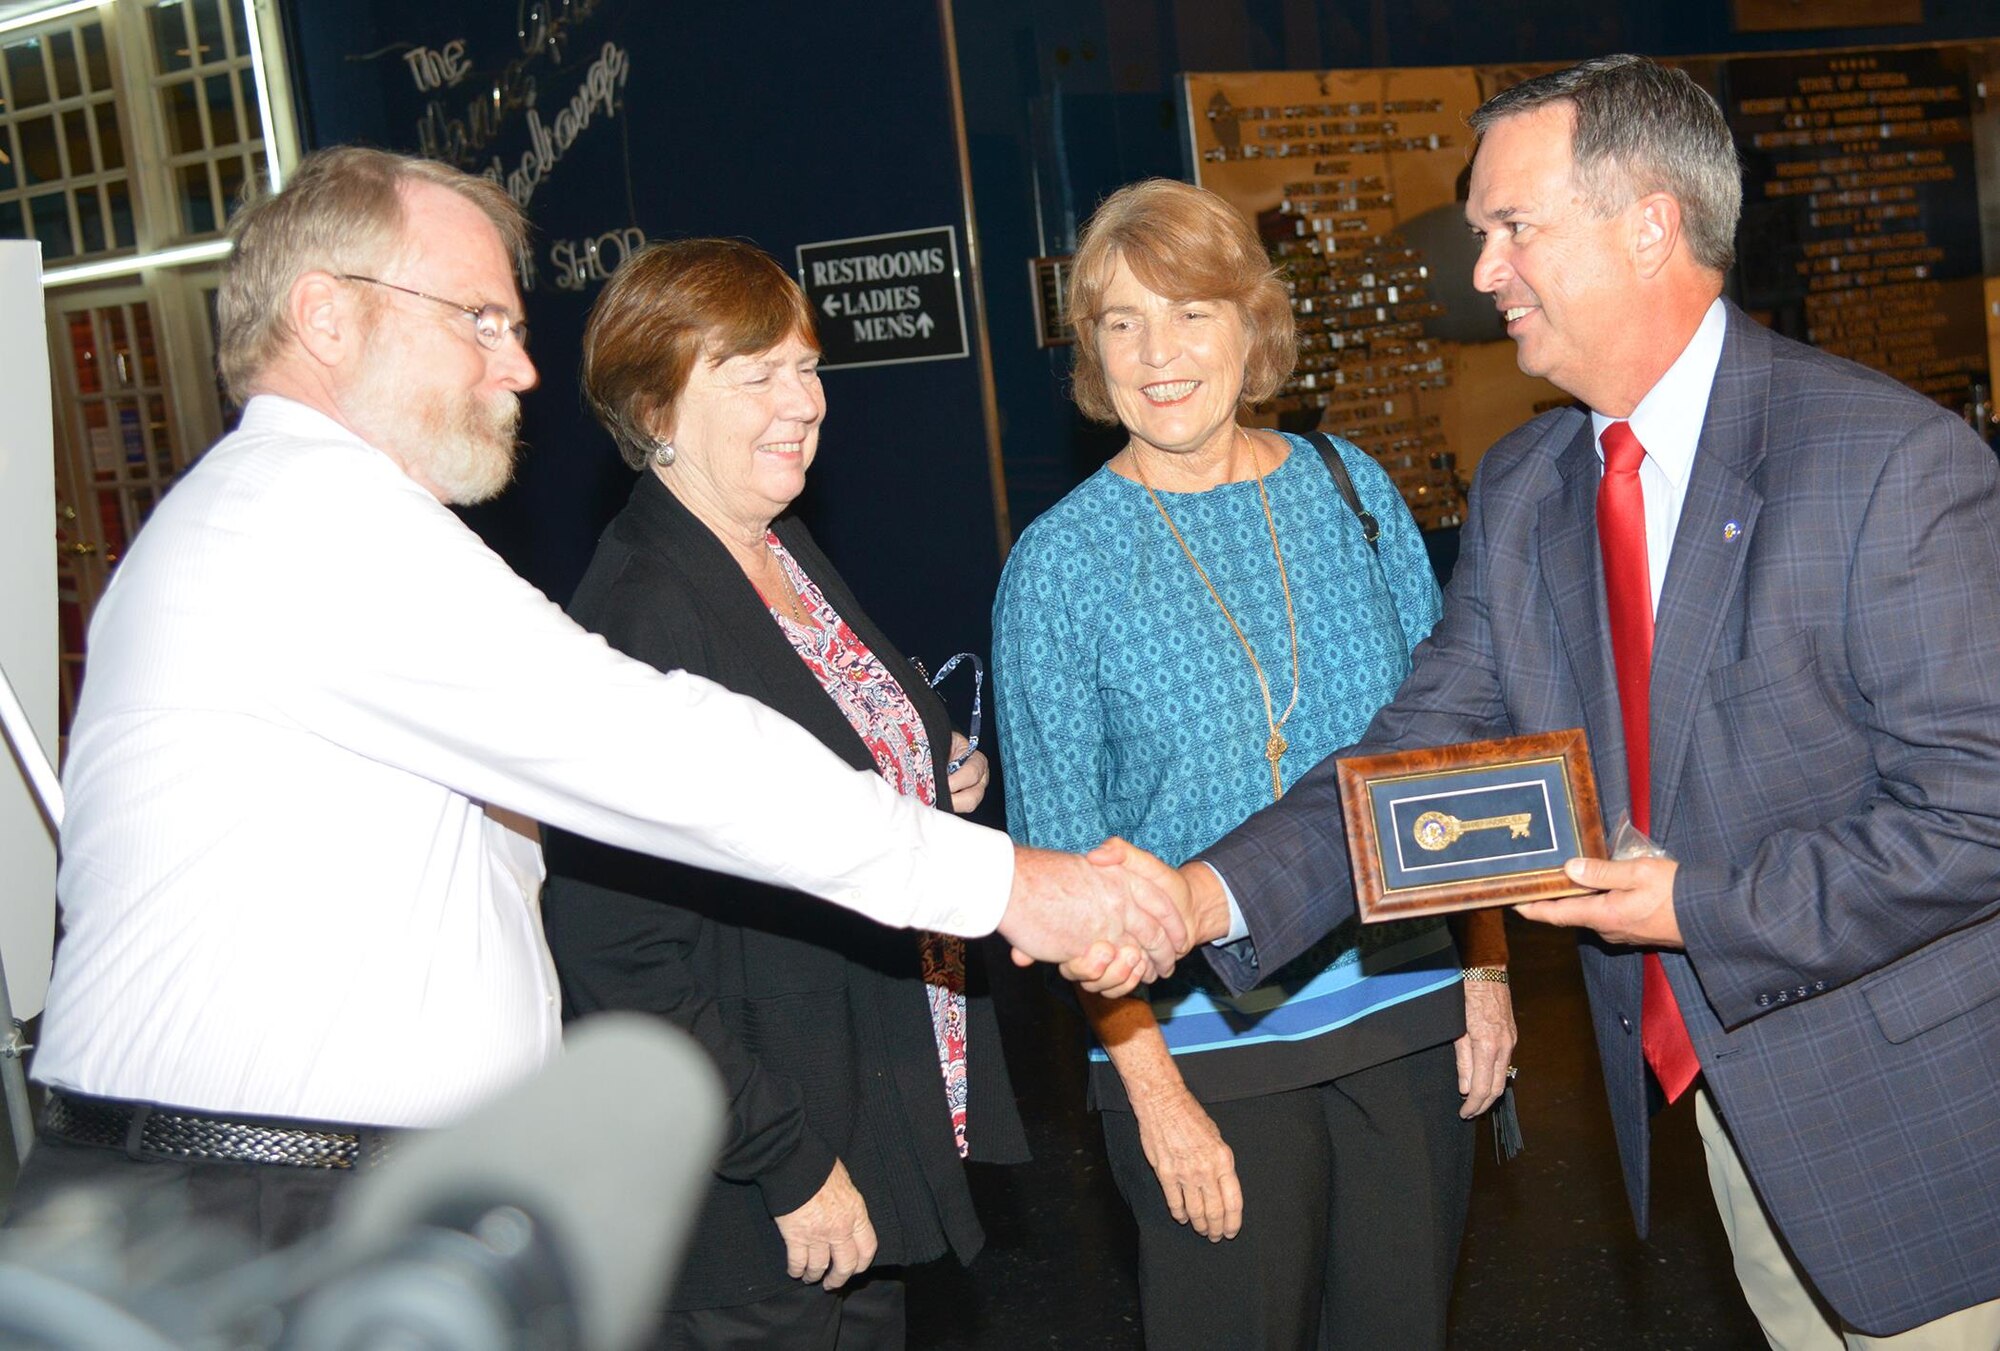 Warner Robins Mayor Randy Toms (right) shakes hands with Frank Guilfoyle as his sisters, Jane Guilfoyle Ward and Anne Guilfoyle Charlton, look on. The siblings are the grandchildren of Gen. Augustine Warner Robins, who both the town and the base are named after. Toms presented them with the key to the city. (U.S. Air Force photo/Ray Crayton) 